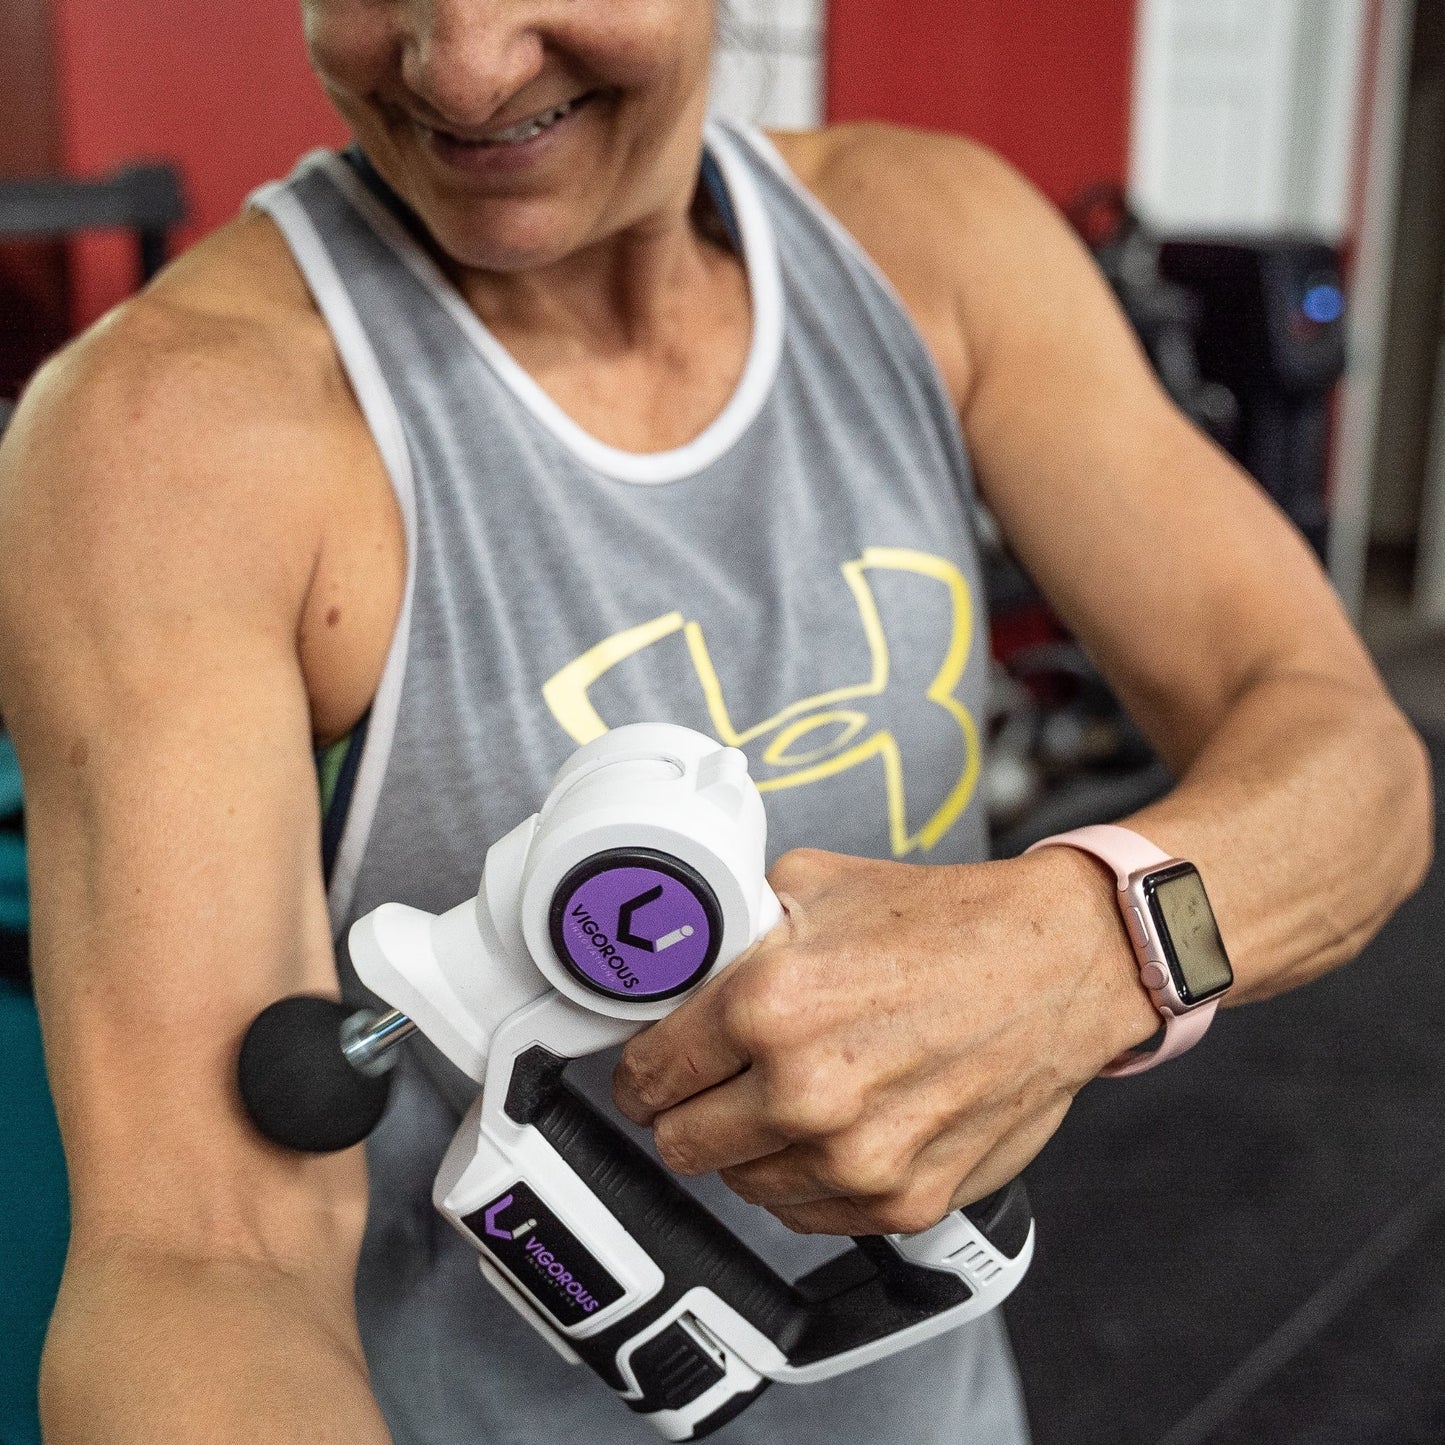 "This is the real deal! My muscle agree!  I love the ease of use and how it makes my body feel after strenuous workout. " S Taveras valued customer